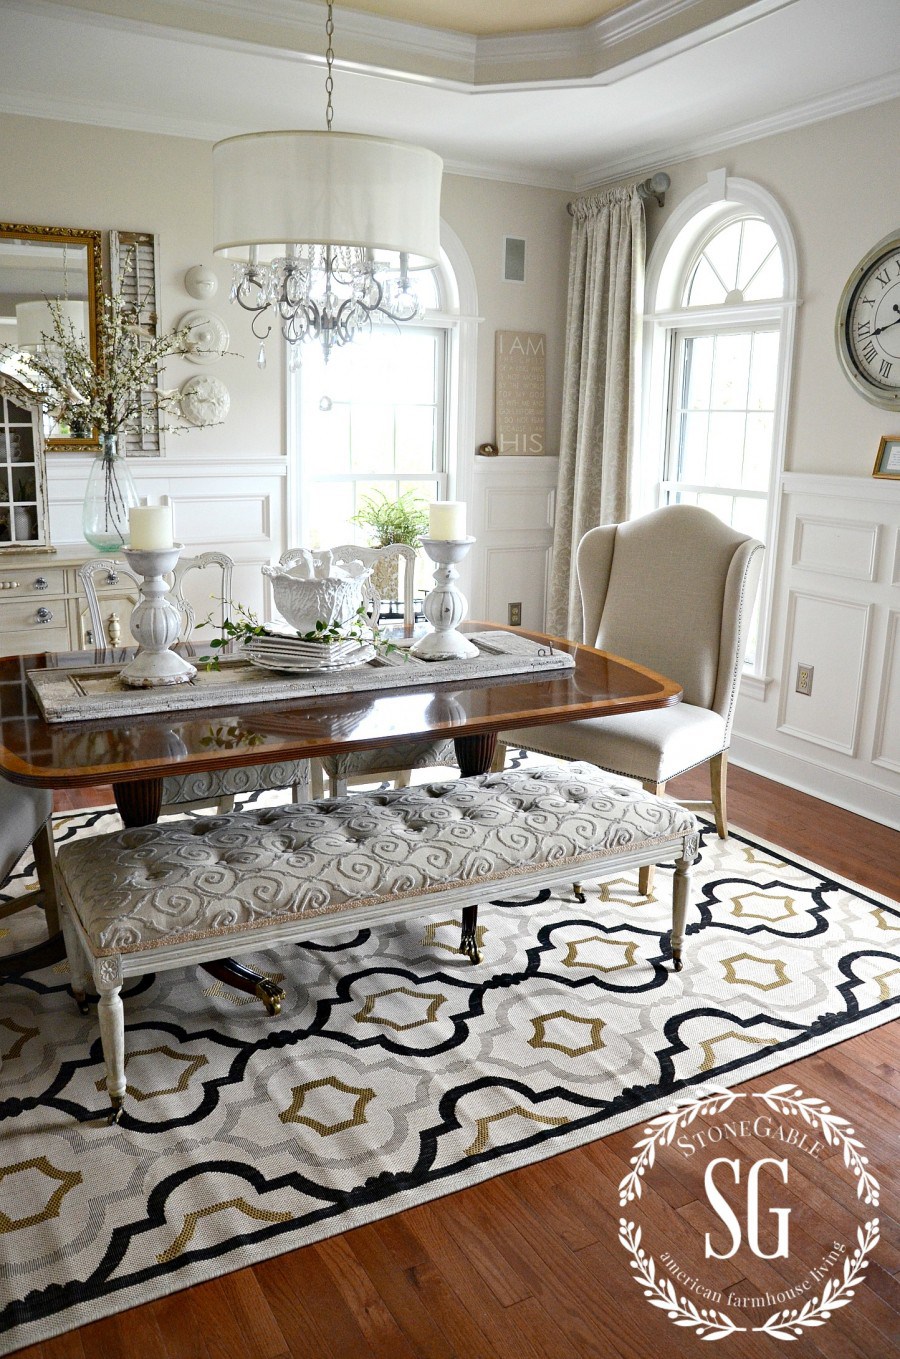 rugs for dining room 5 rules for choosing the perfect dining room rug-dining room -stonegableblog.com SBGRBEJ